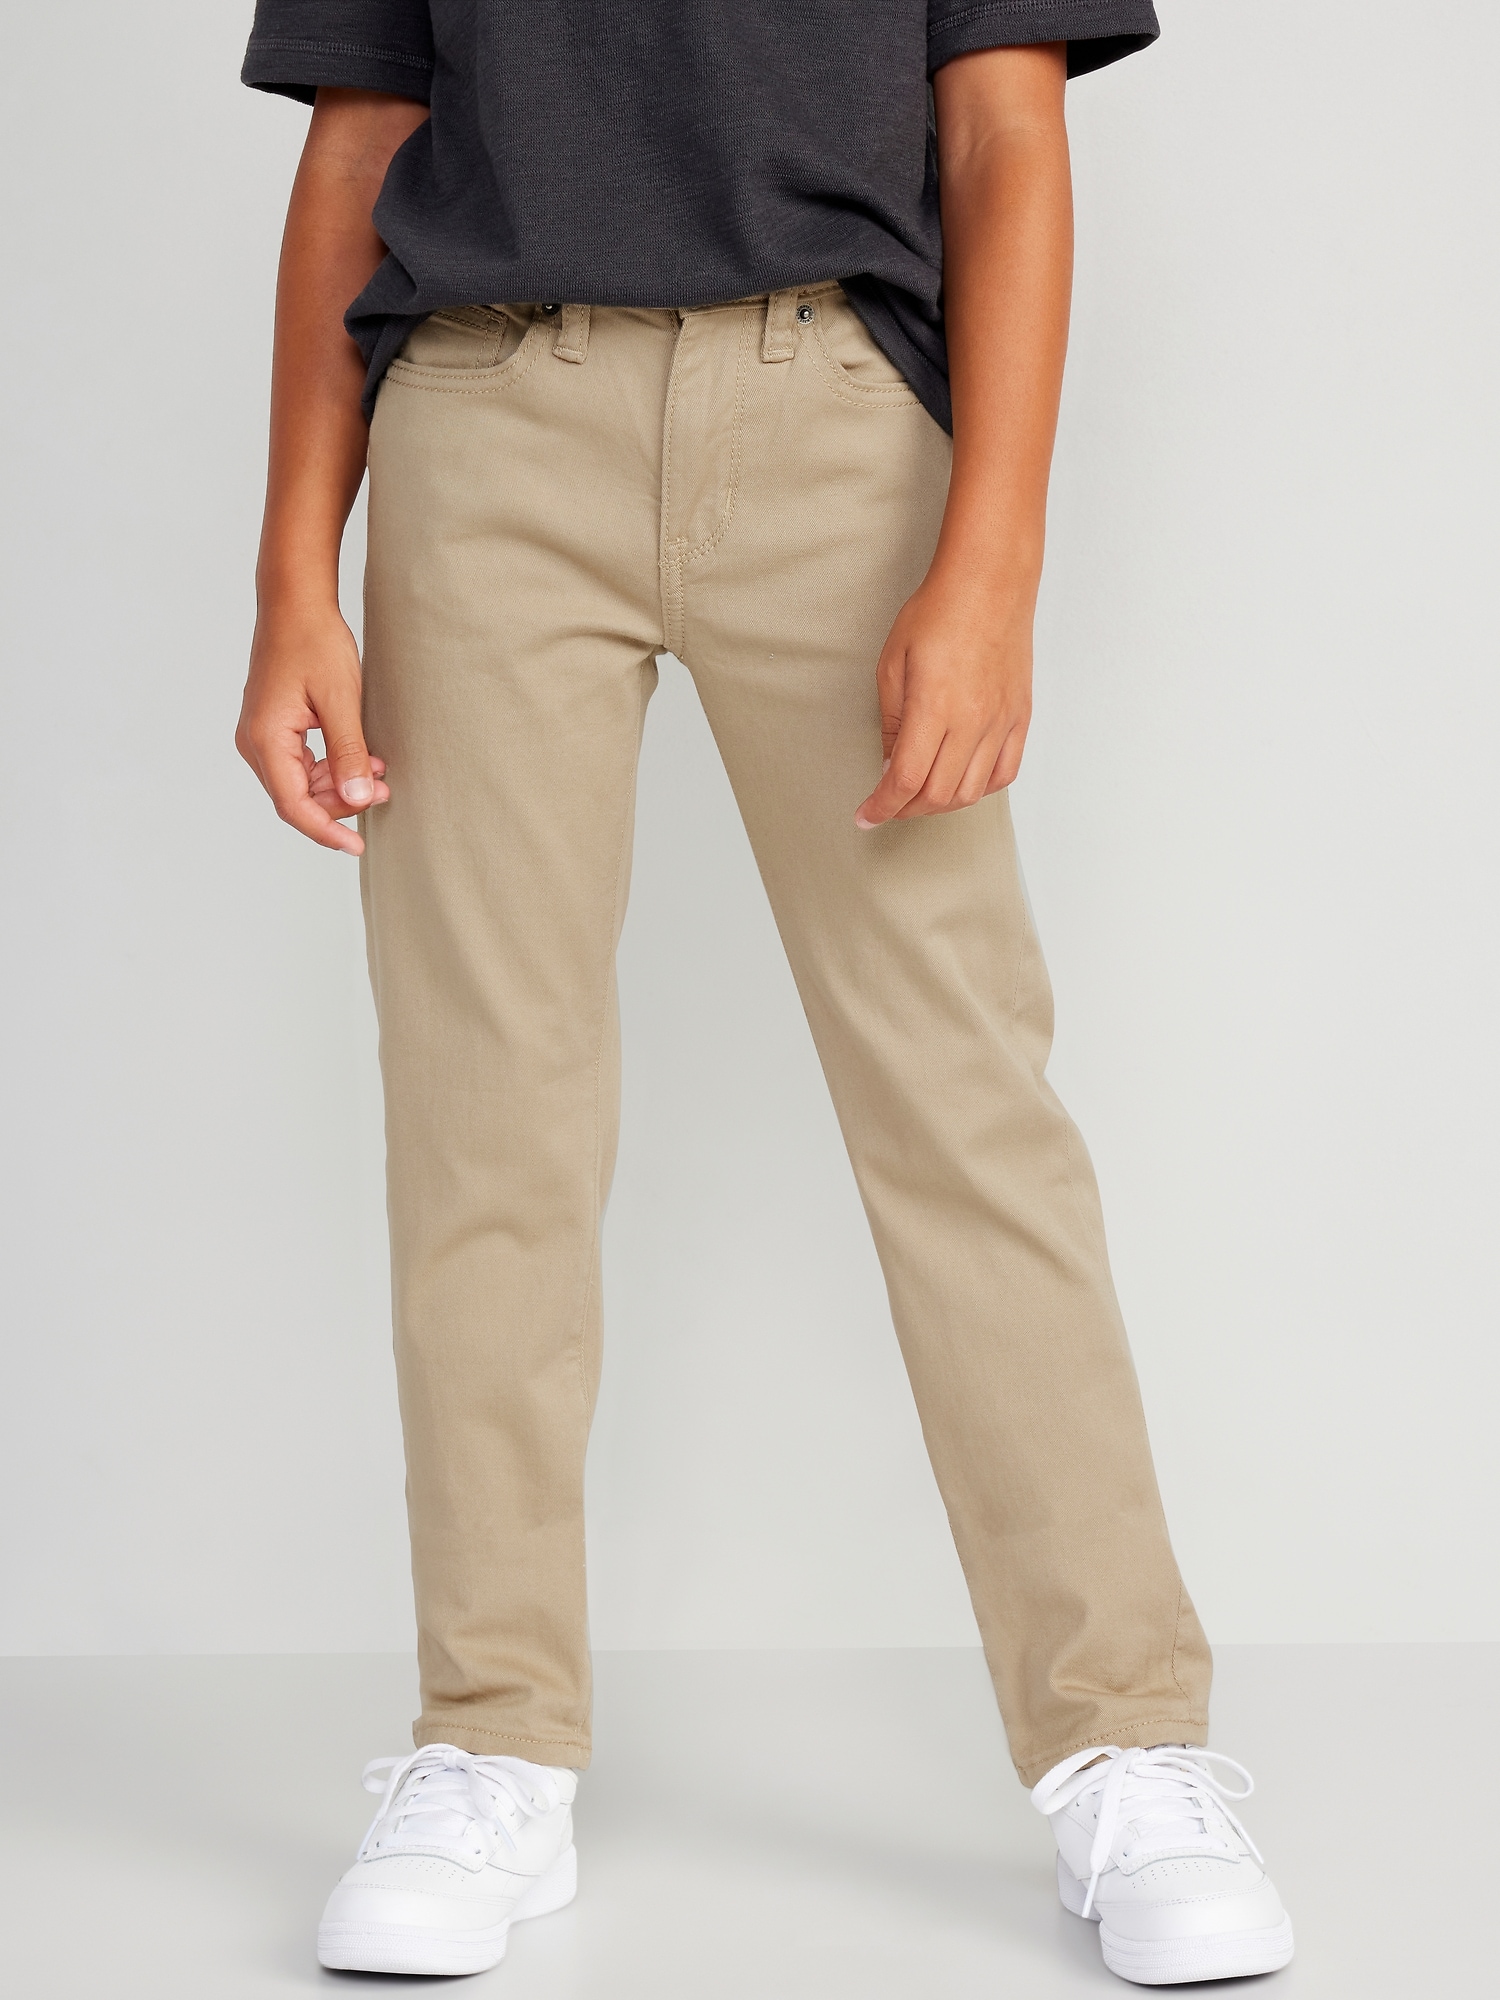 Slim 360° Stretch Twill Pants for Boys | Old Navy